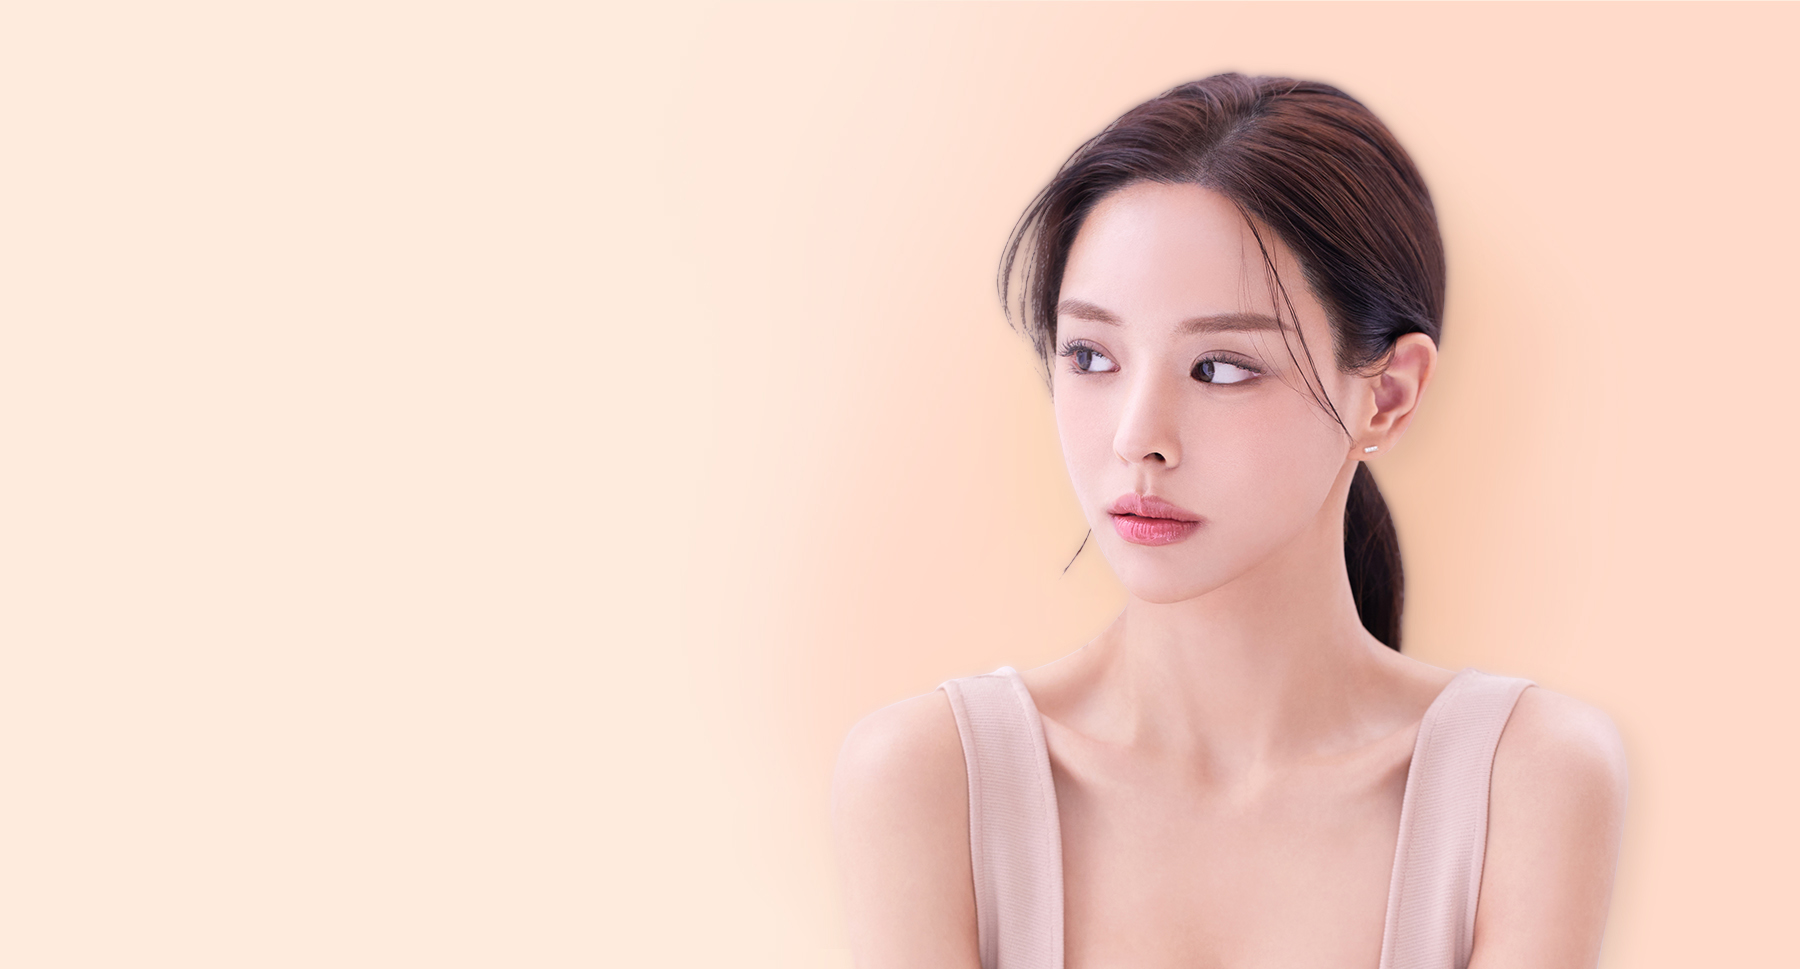 Youthful appearance with a clearer and well-defined eye shape